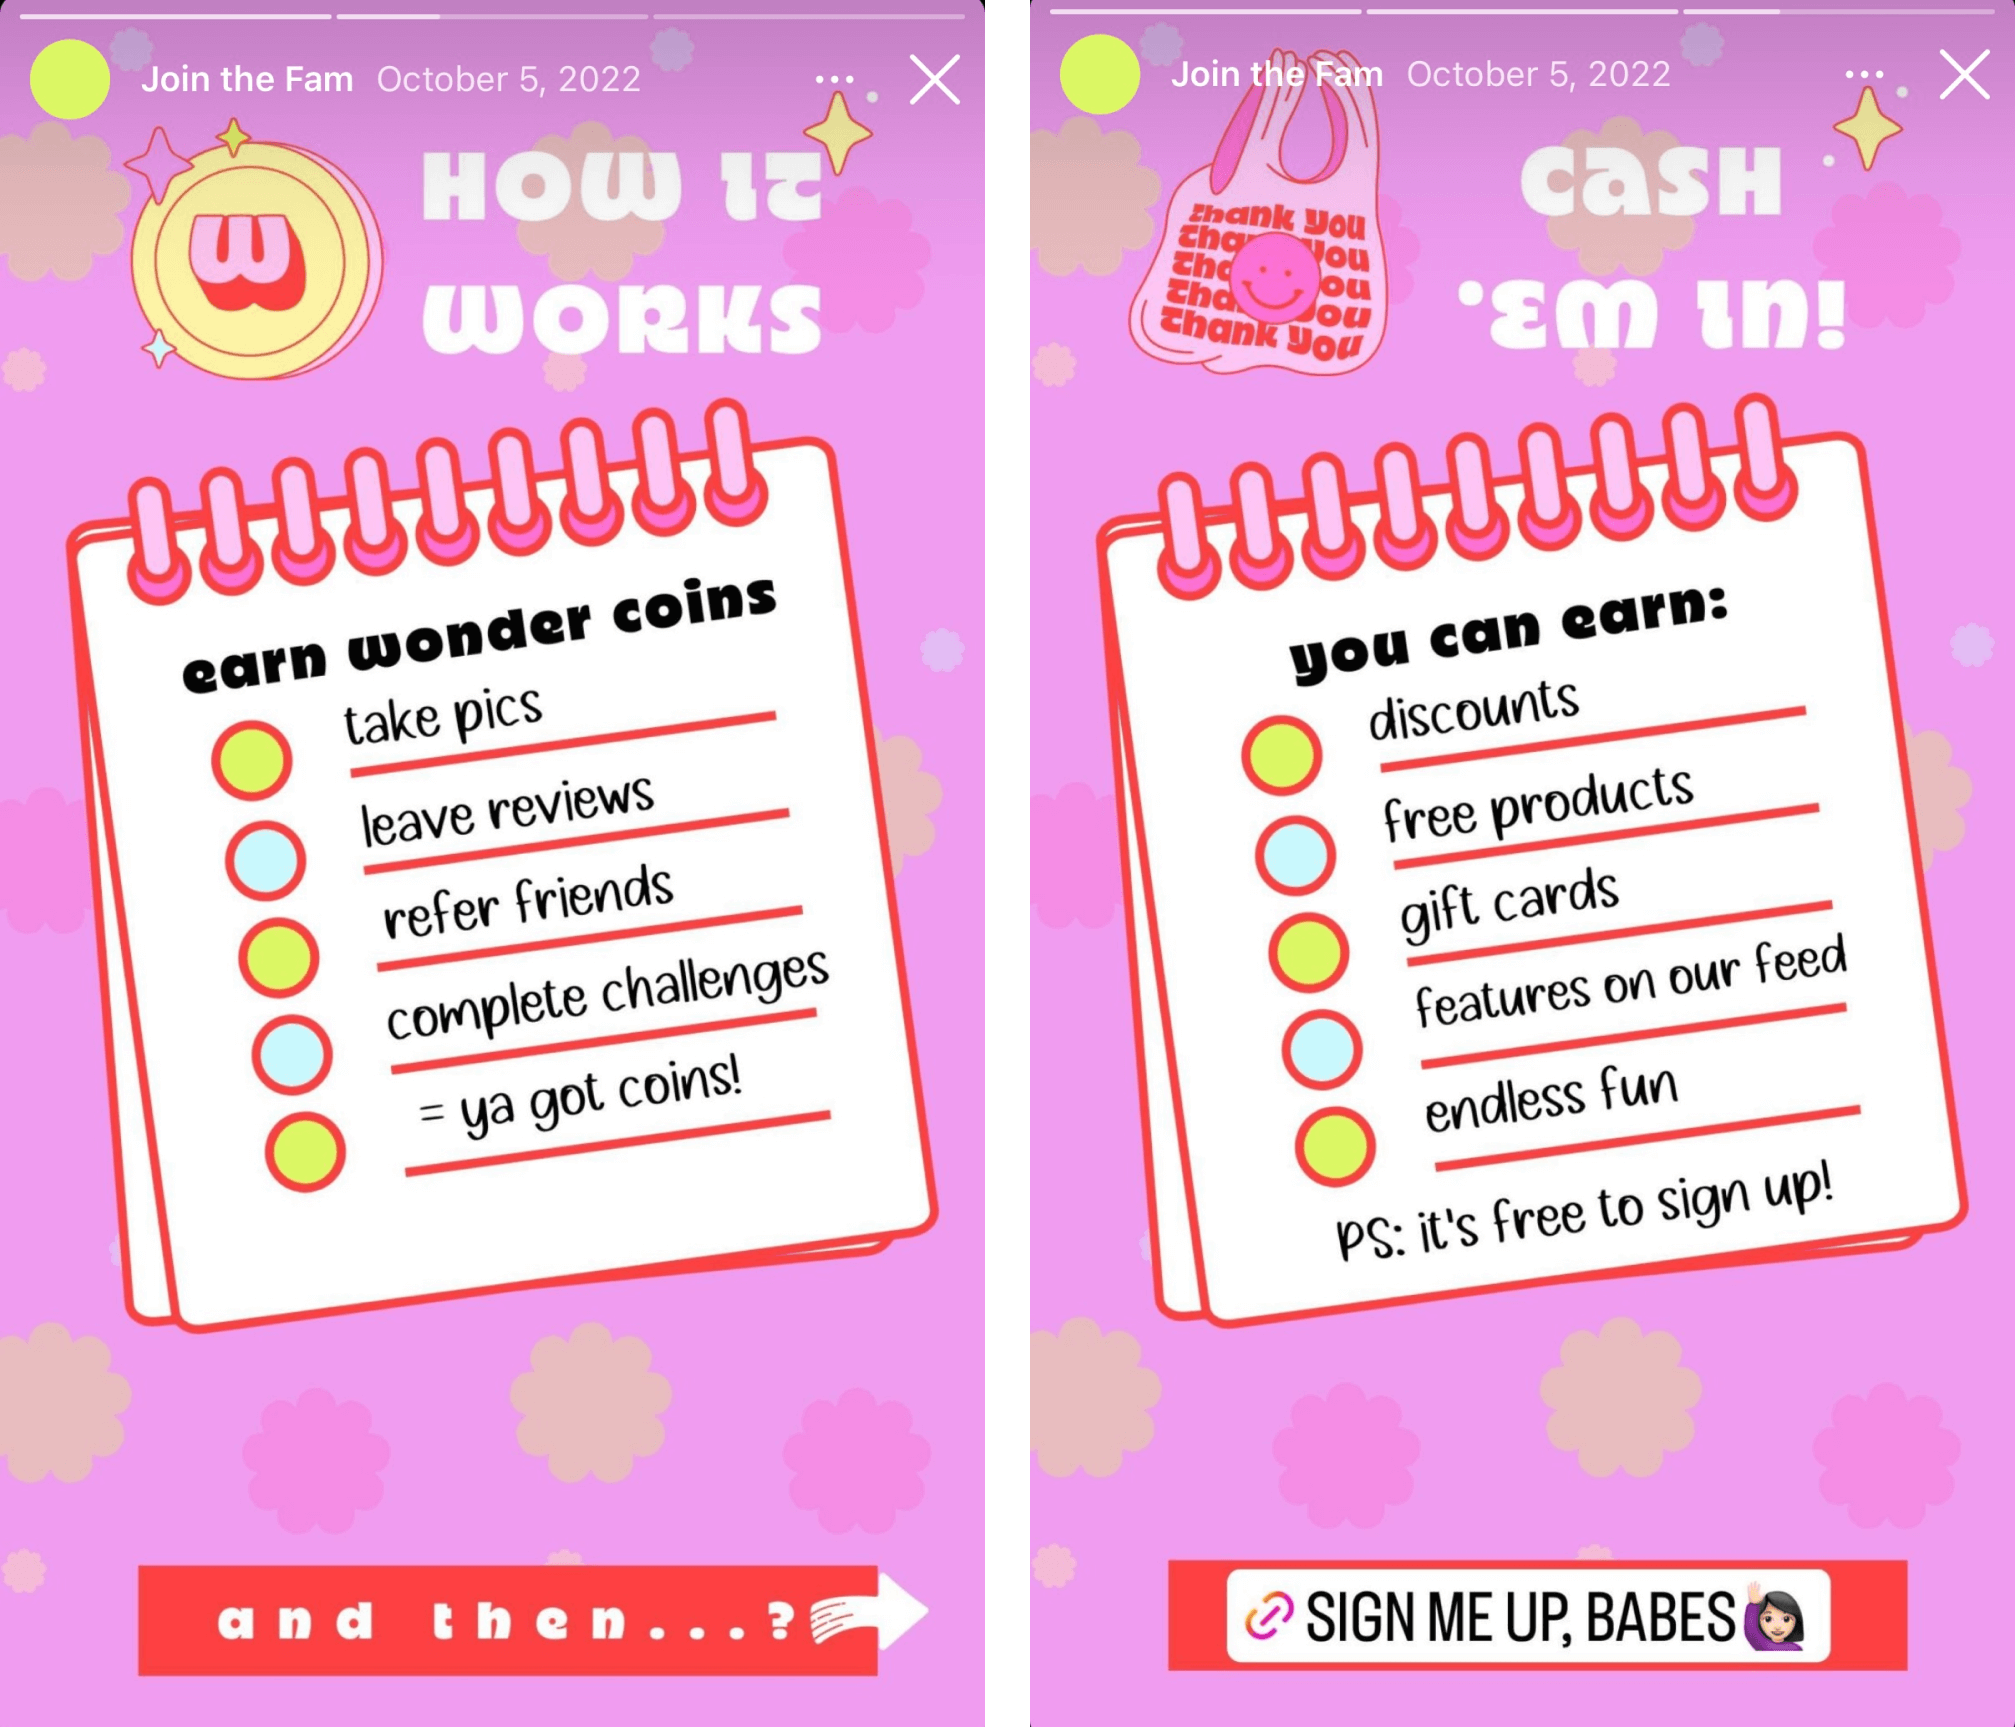 2 screenshots of Instagram stories from Woof & Wonder with its brand colors and icons. The first explains how the program works in terms of earning points and the second story shows how you can cash the points in, with a call-to-action to sign-up for the program.